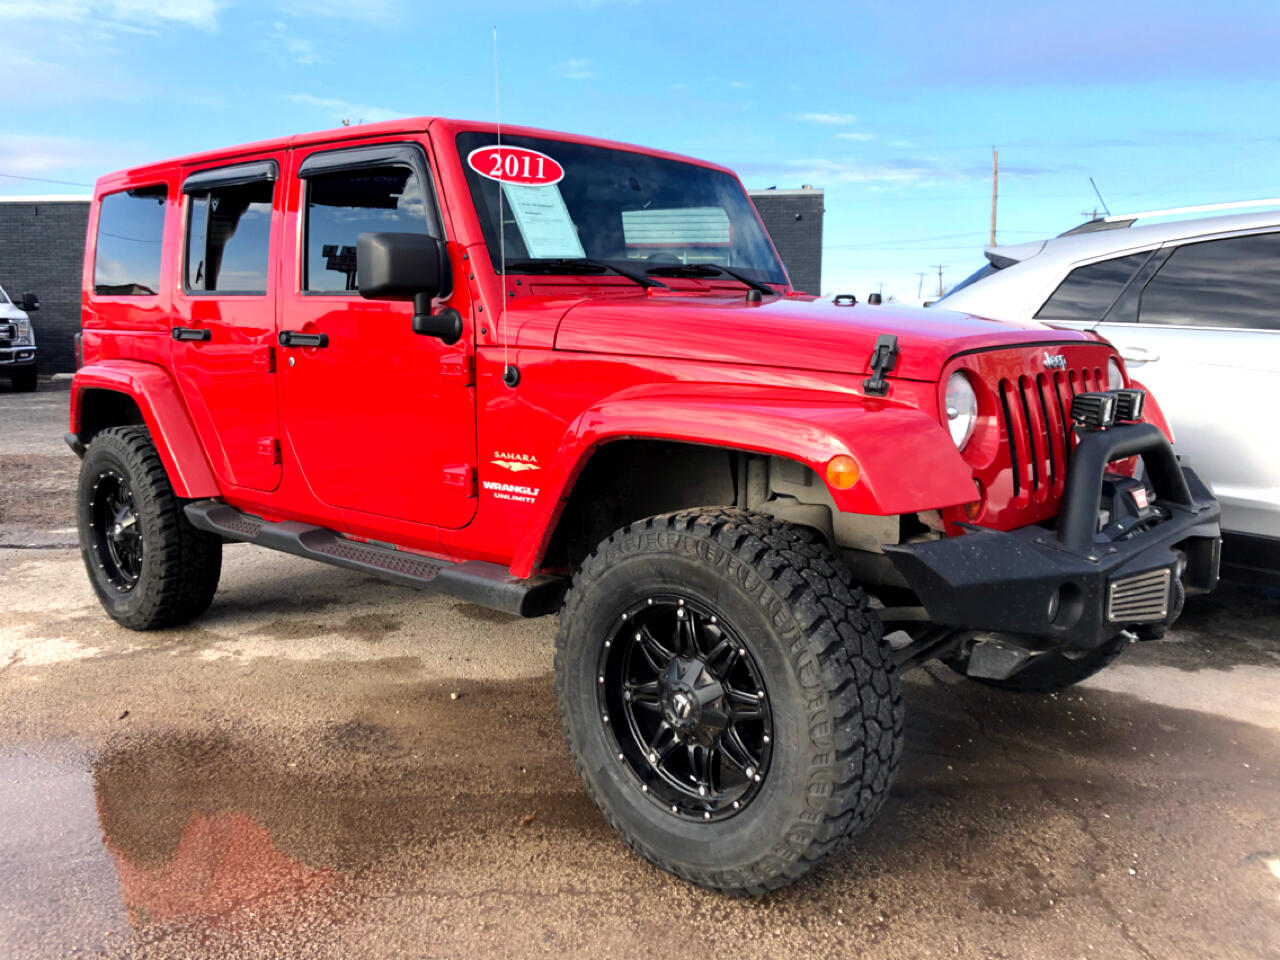 Used 2011 Jeep Wrangler Unlimited Sahara 4X4 Hard Top for